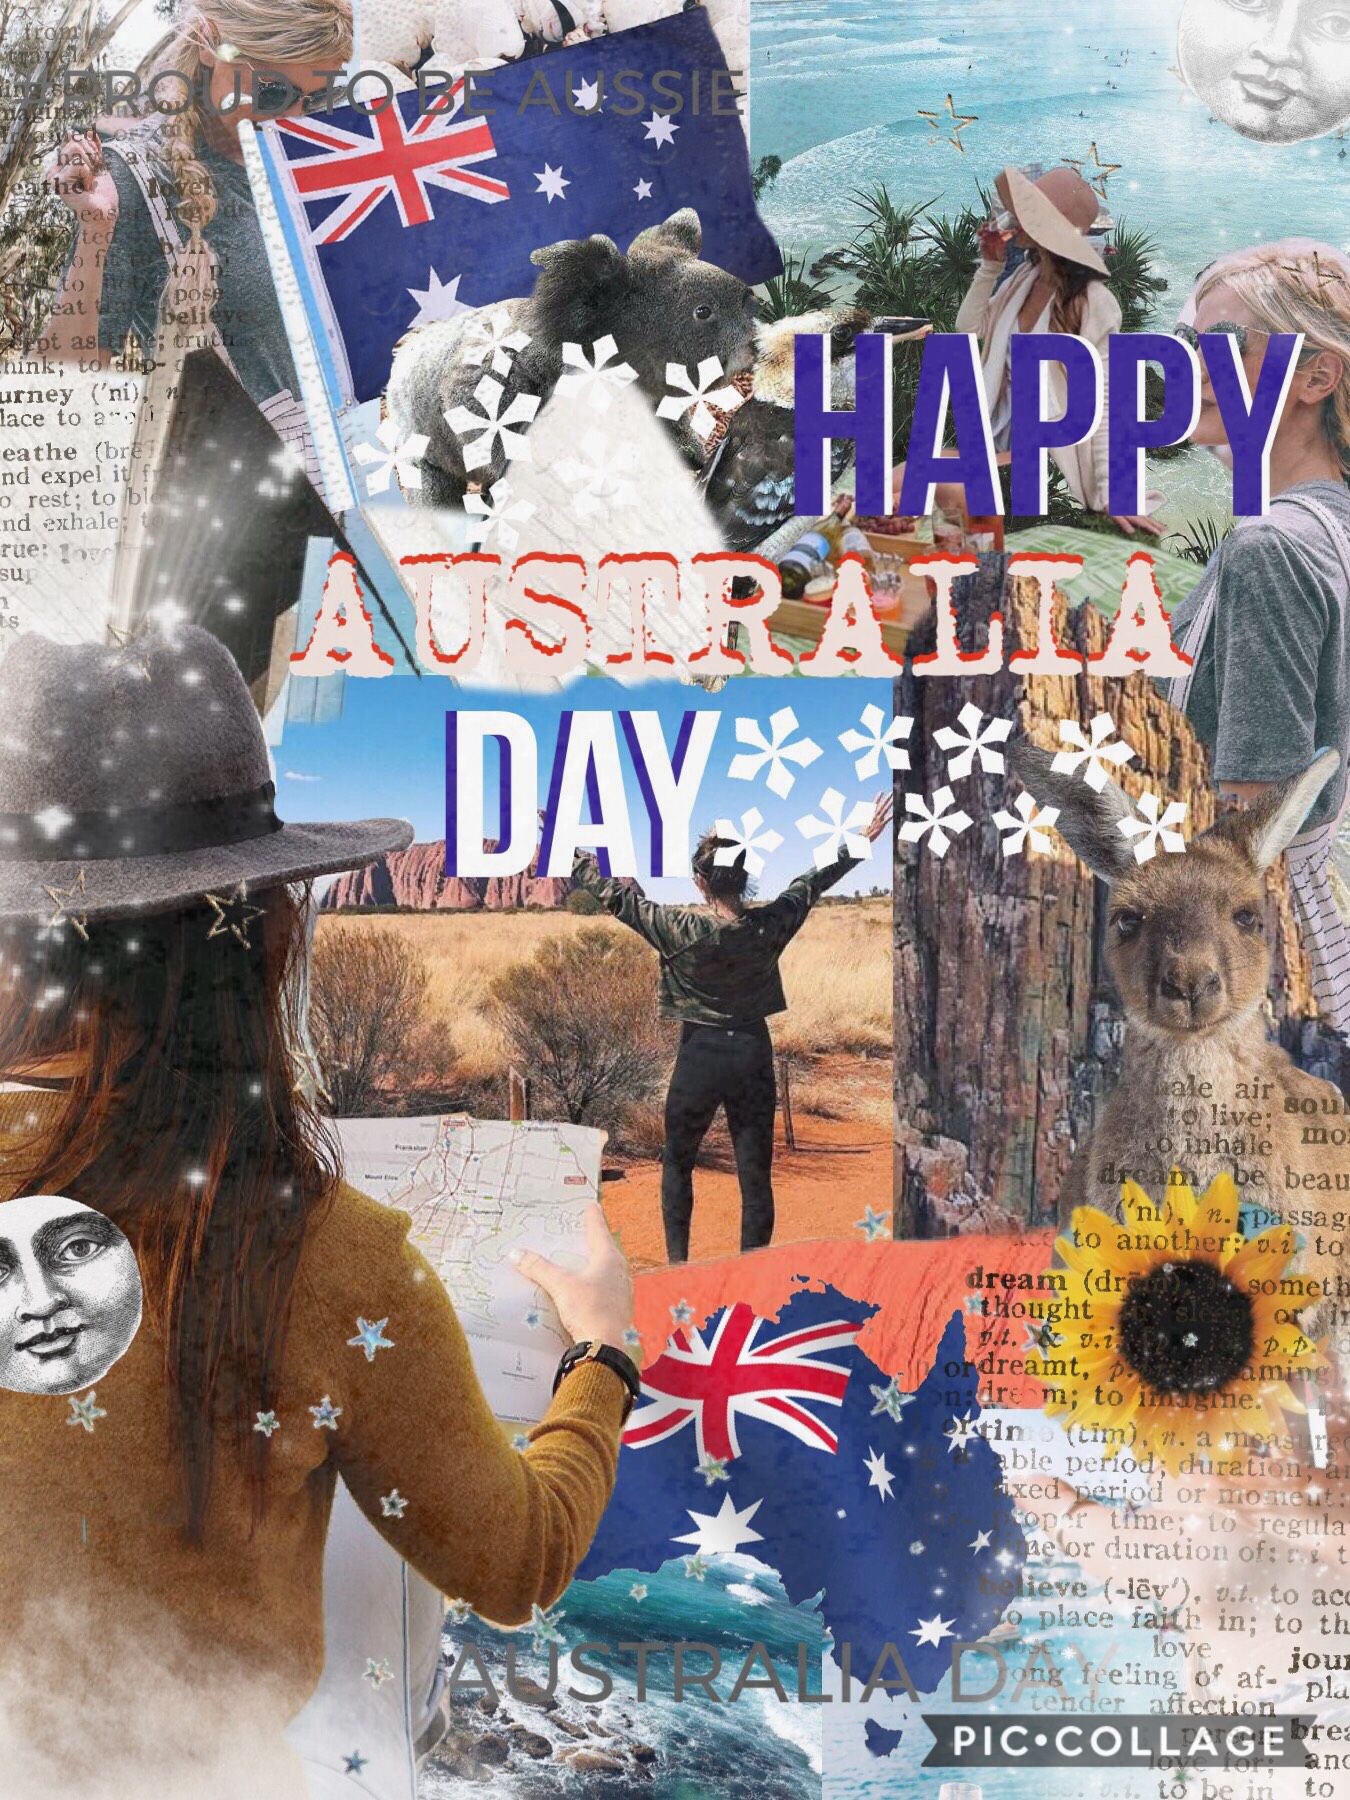 HAPPY AUSTRALIA DAYY YA’LL! I didn’t have the best morning and threw up 😂, but I feel much better now! I also drew the Australia flag on my wrist, and had a huge partayy! Hope you have the best Australia Day to all the 
Aussies out there! Peace 👌🏼